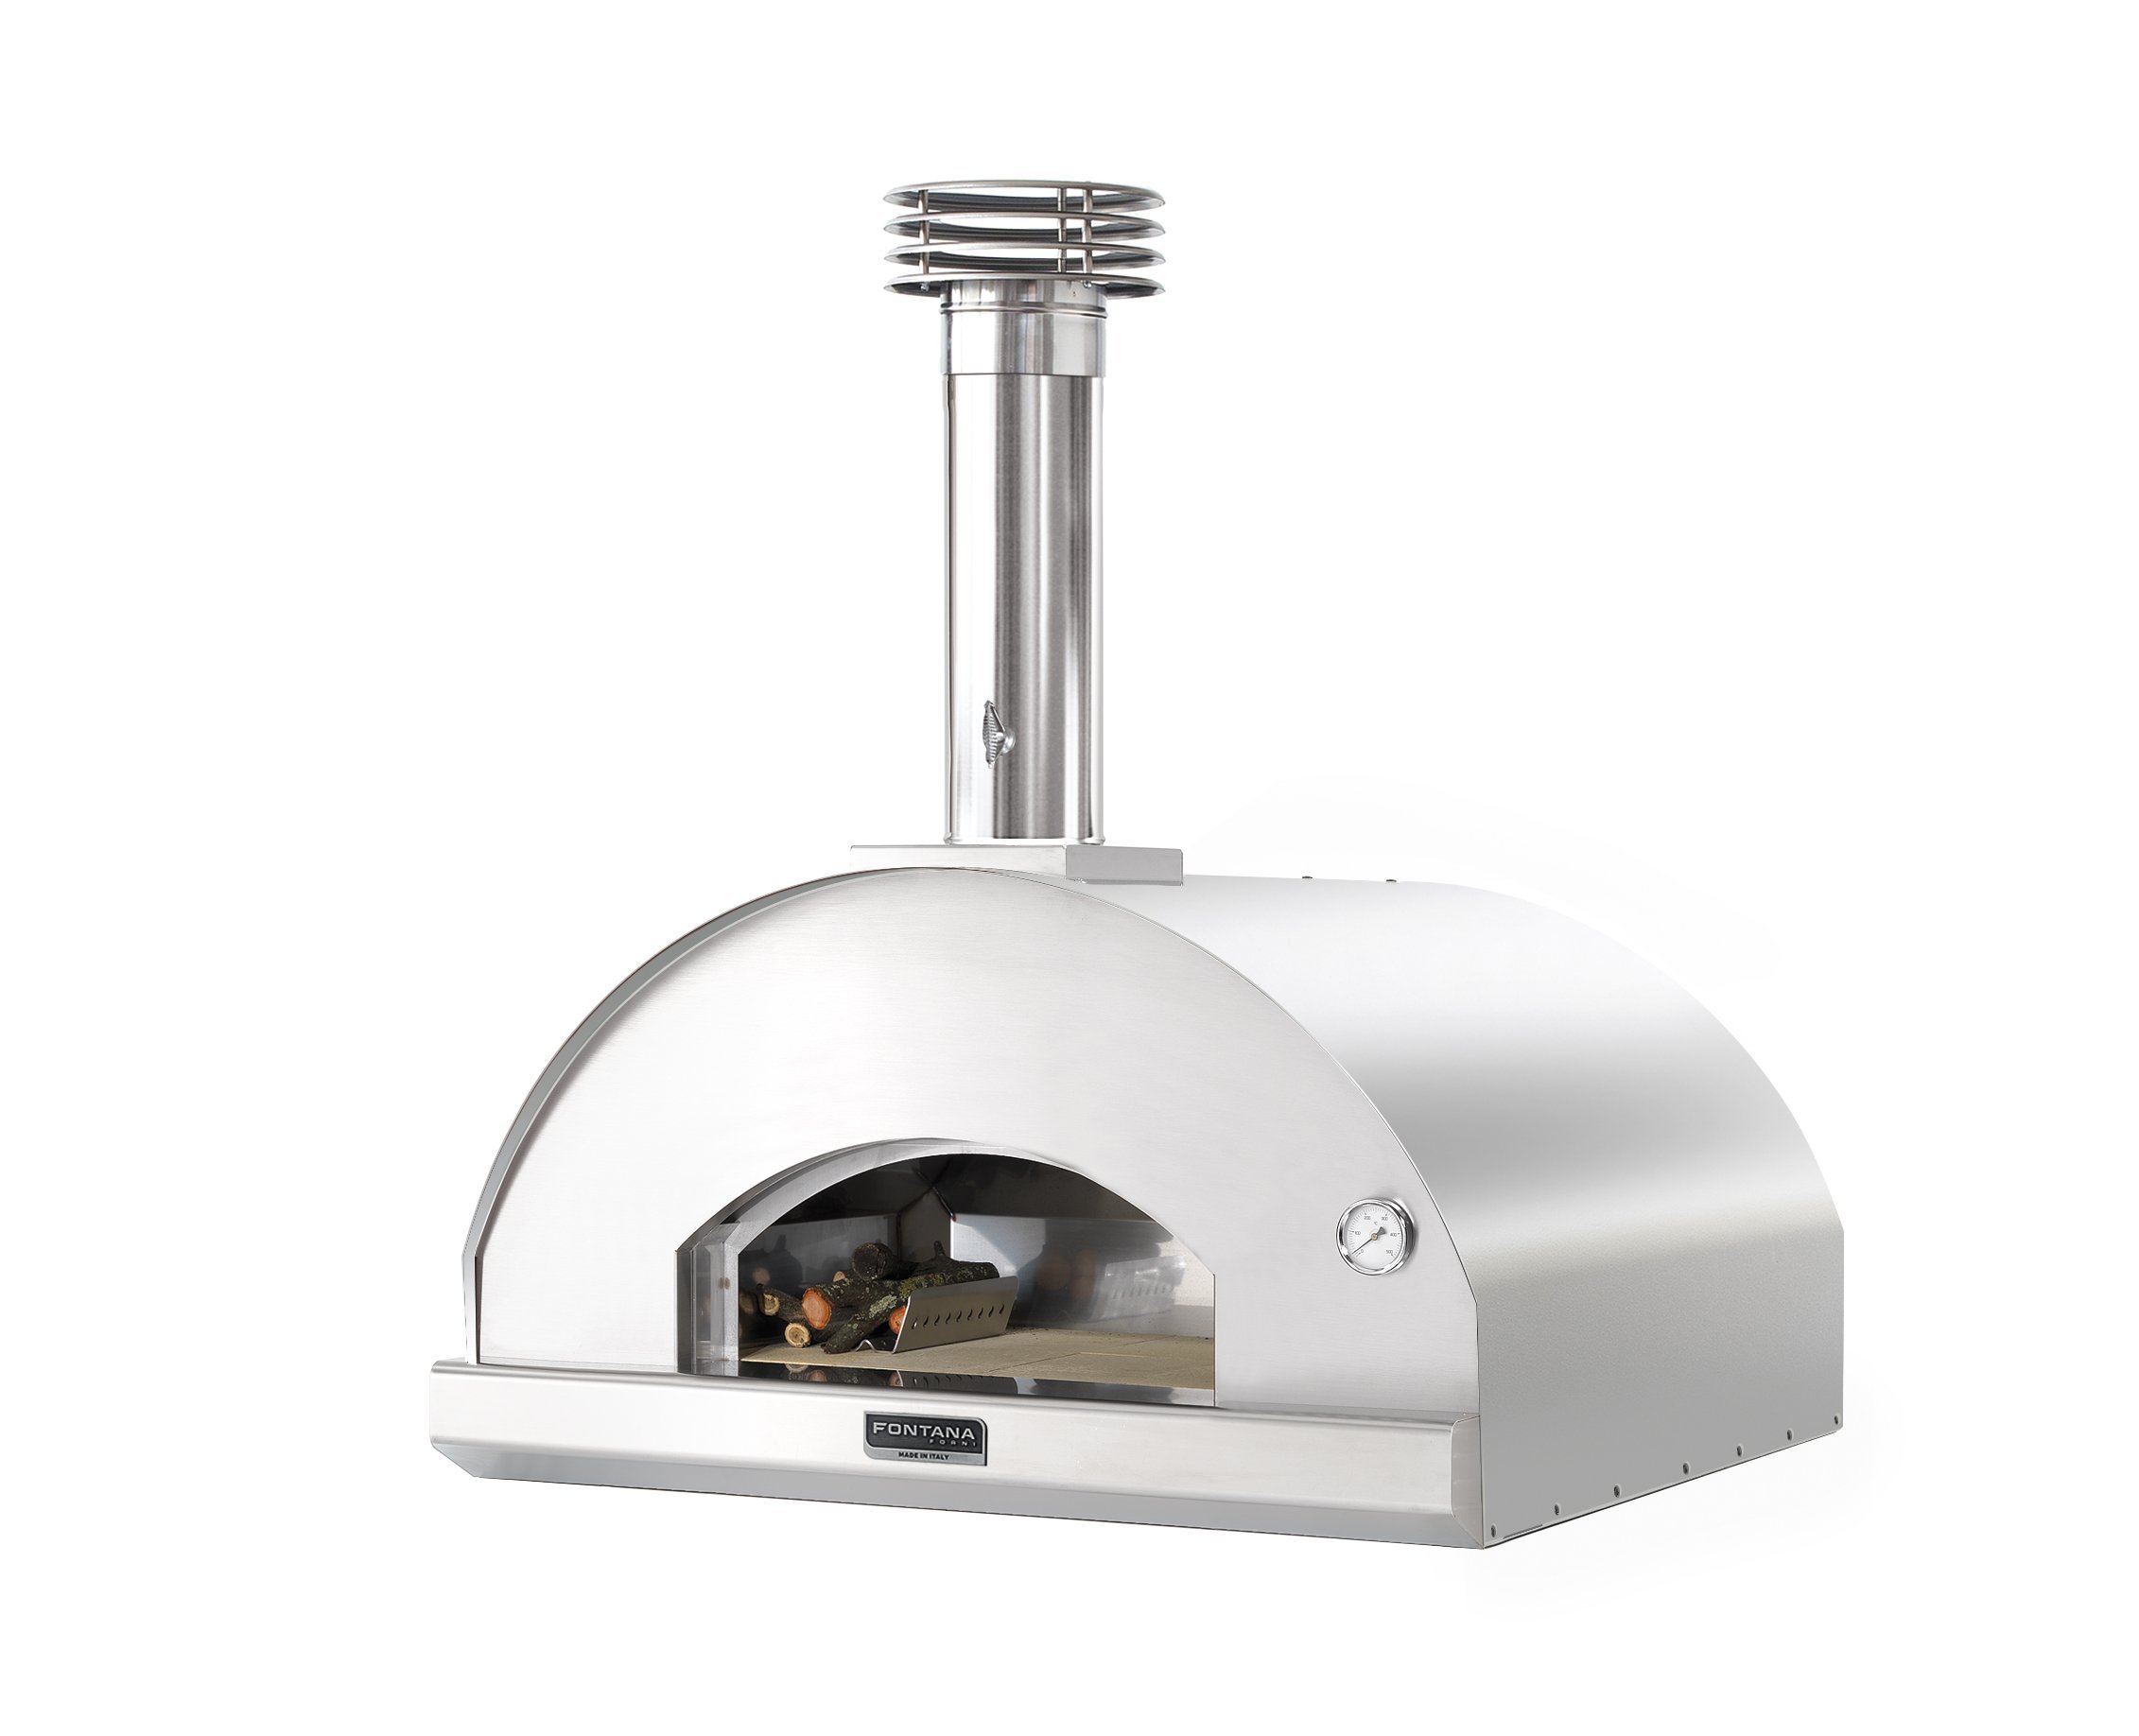 Fontana Marinara wood dome oven, stainless steel pizza oven with wood firing.